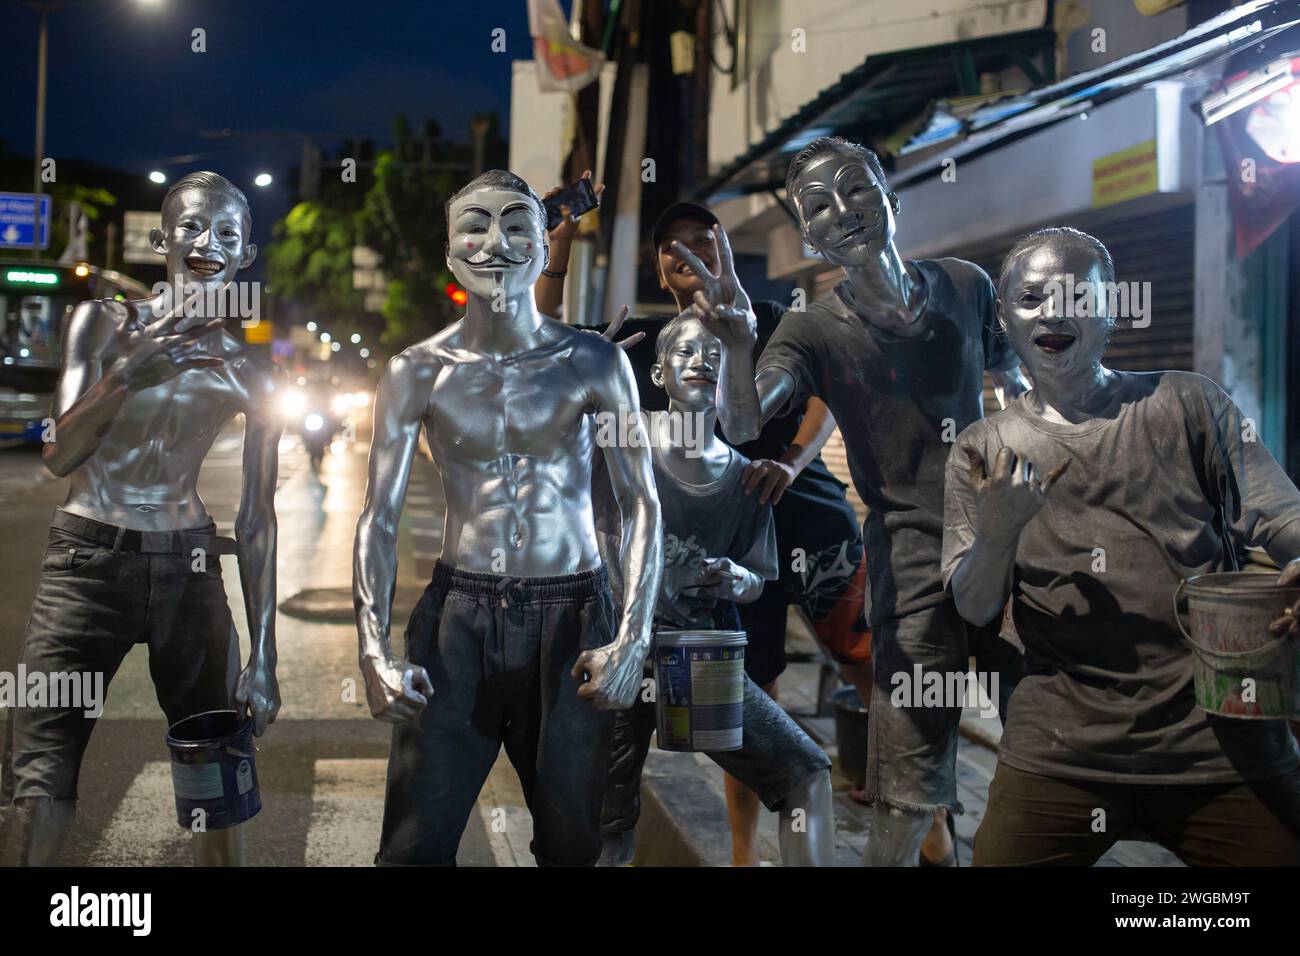 Jakarta, Indonesia - February 3, 2024: A group of unidentified young men with bodies painted silver seen on the streets of Jakarta, Indonesia. Stock Photo